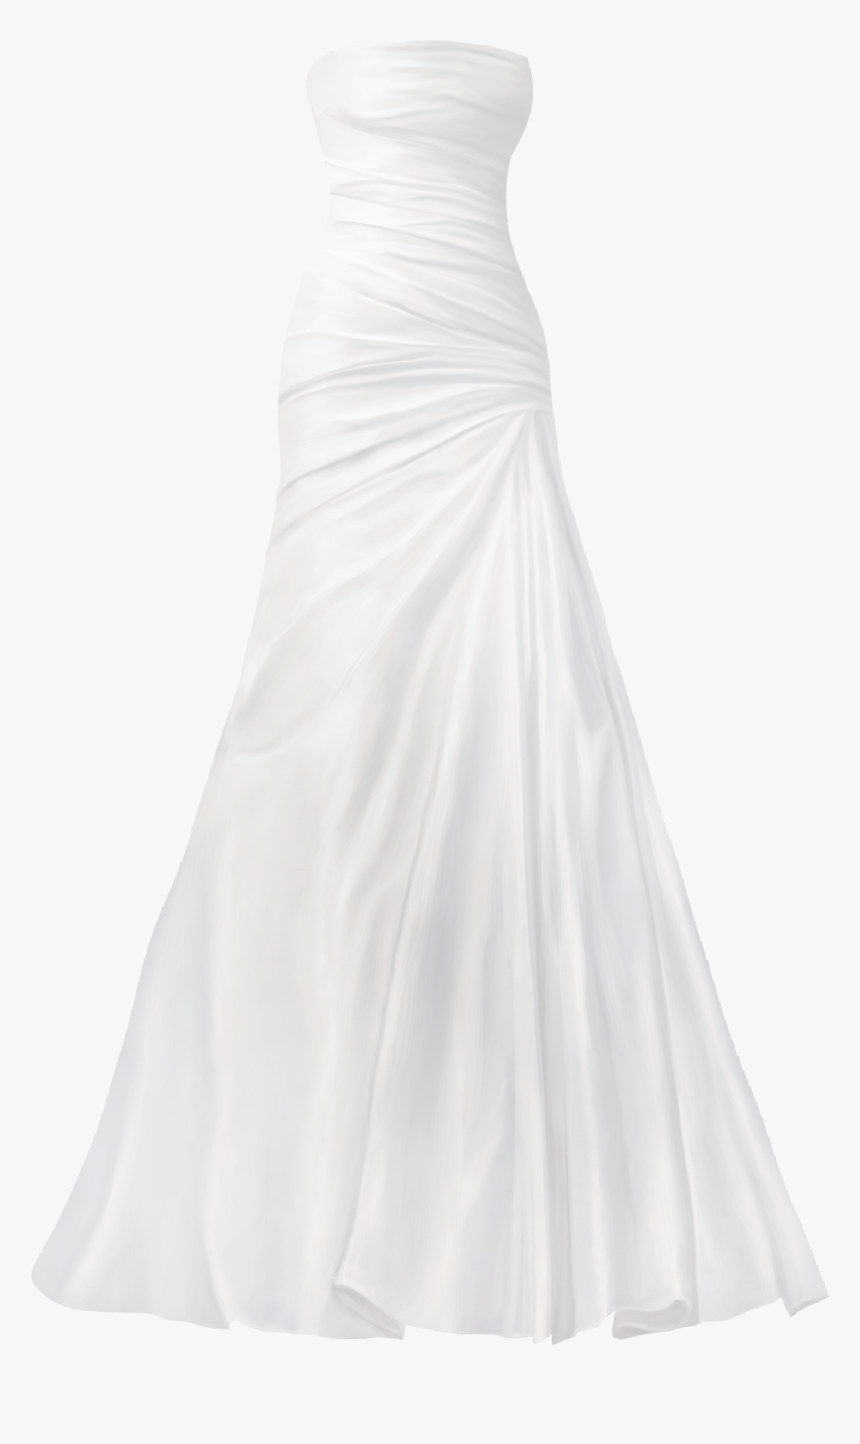 Classical Wedding Dress Png Clip Art - Gown, Transparent Png, Free Download